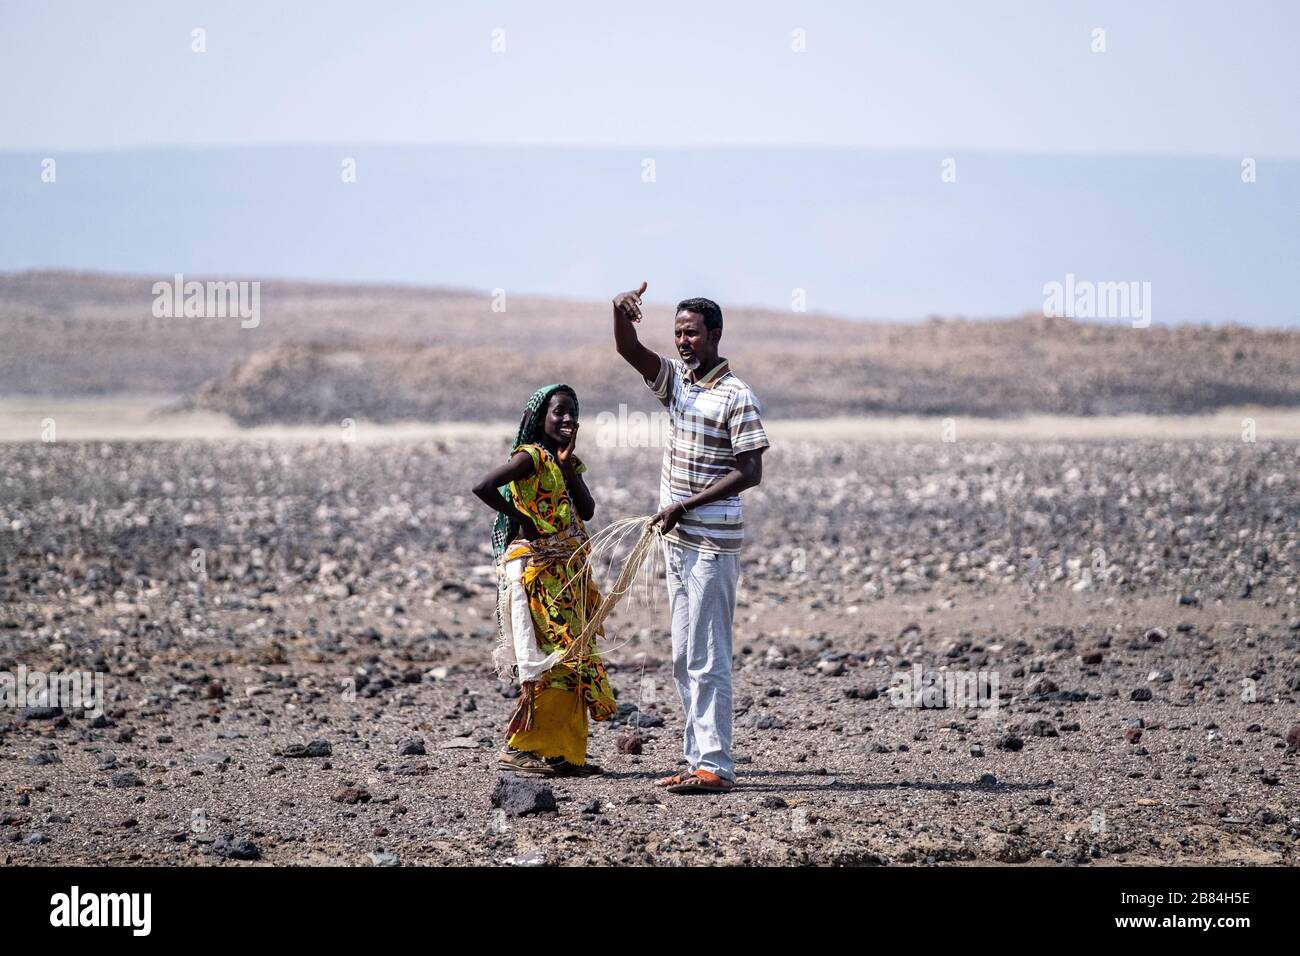 Africa, Djibouti, Lake Abbe. A A woman talks with a man in the desert on the way to Lake Abbe Stock Photo